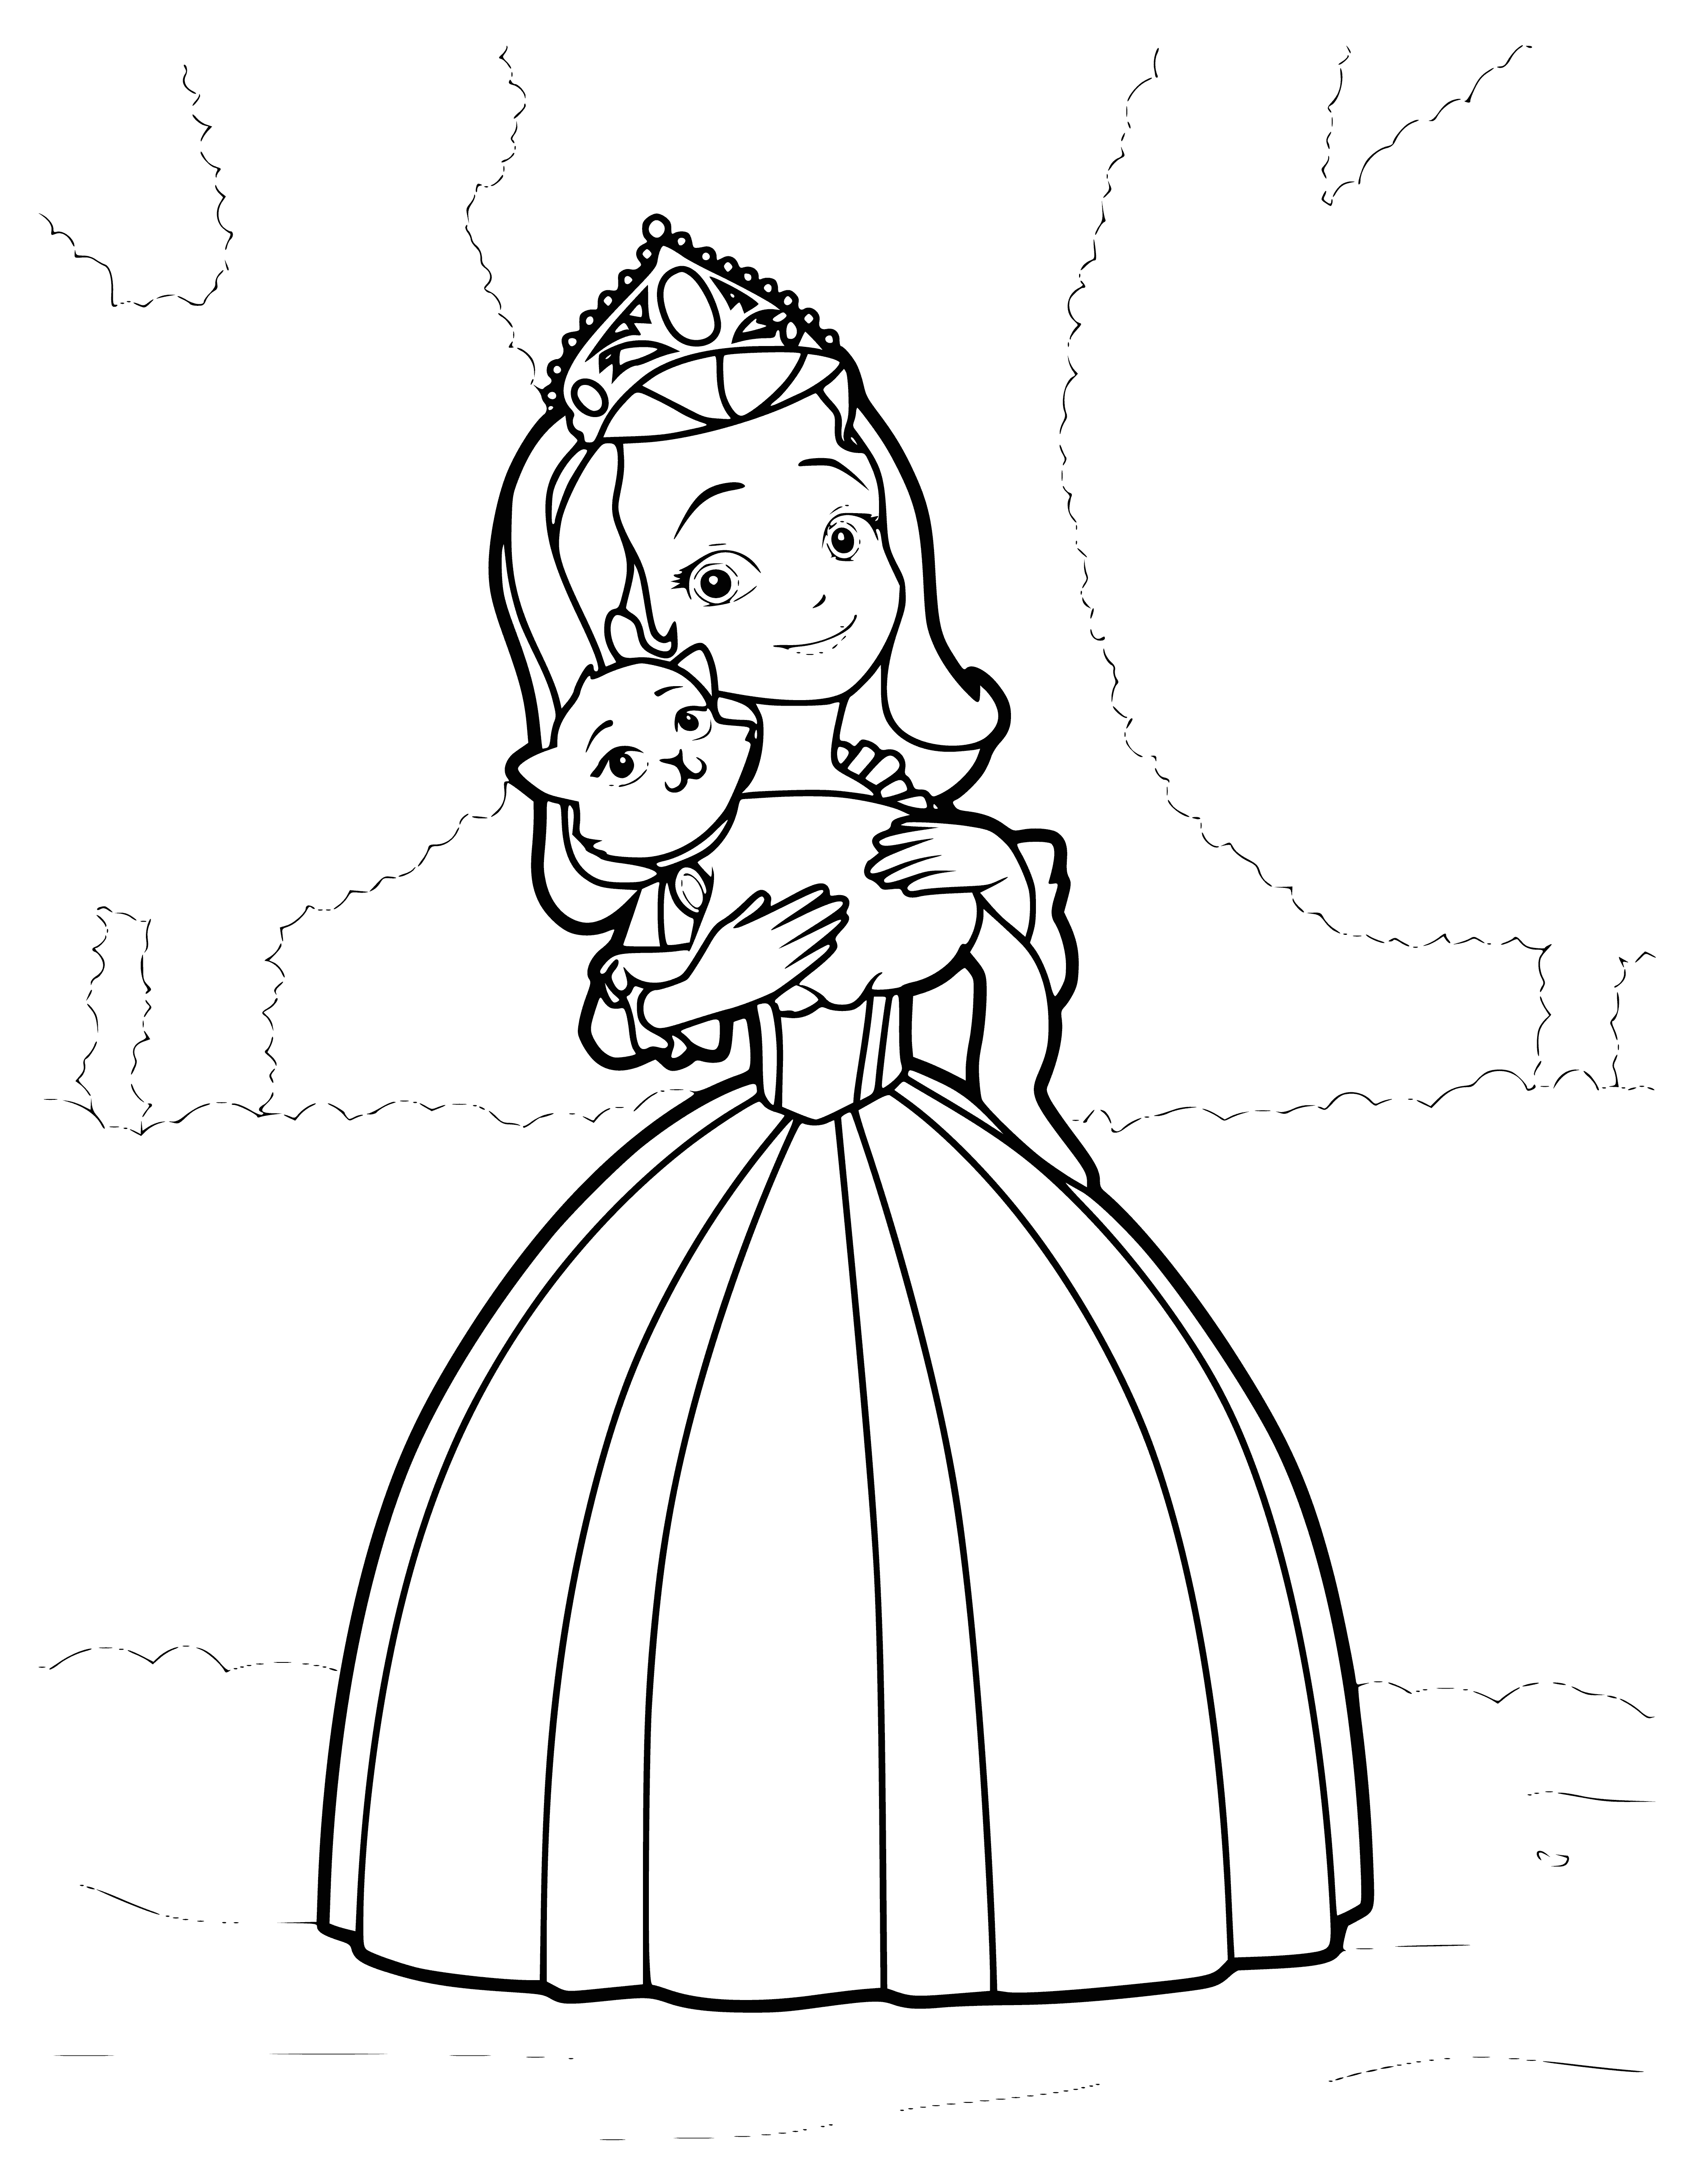 coloring page: Sofia & Amber lovingly sit on a bench with a sweet kitten between them, both in calm-colored dresses & a magical castle background.